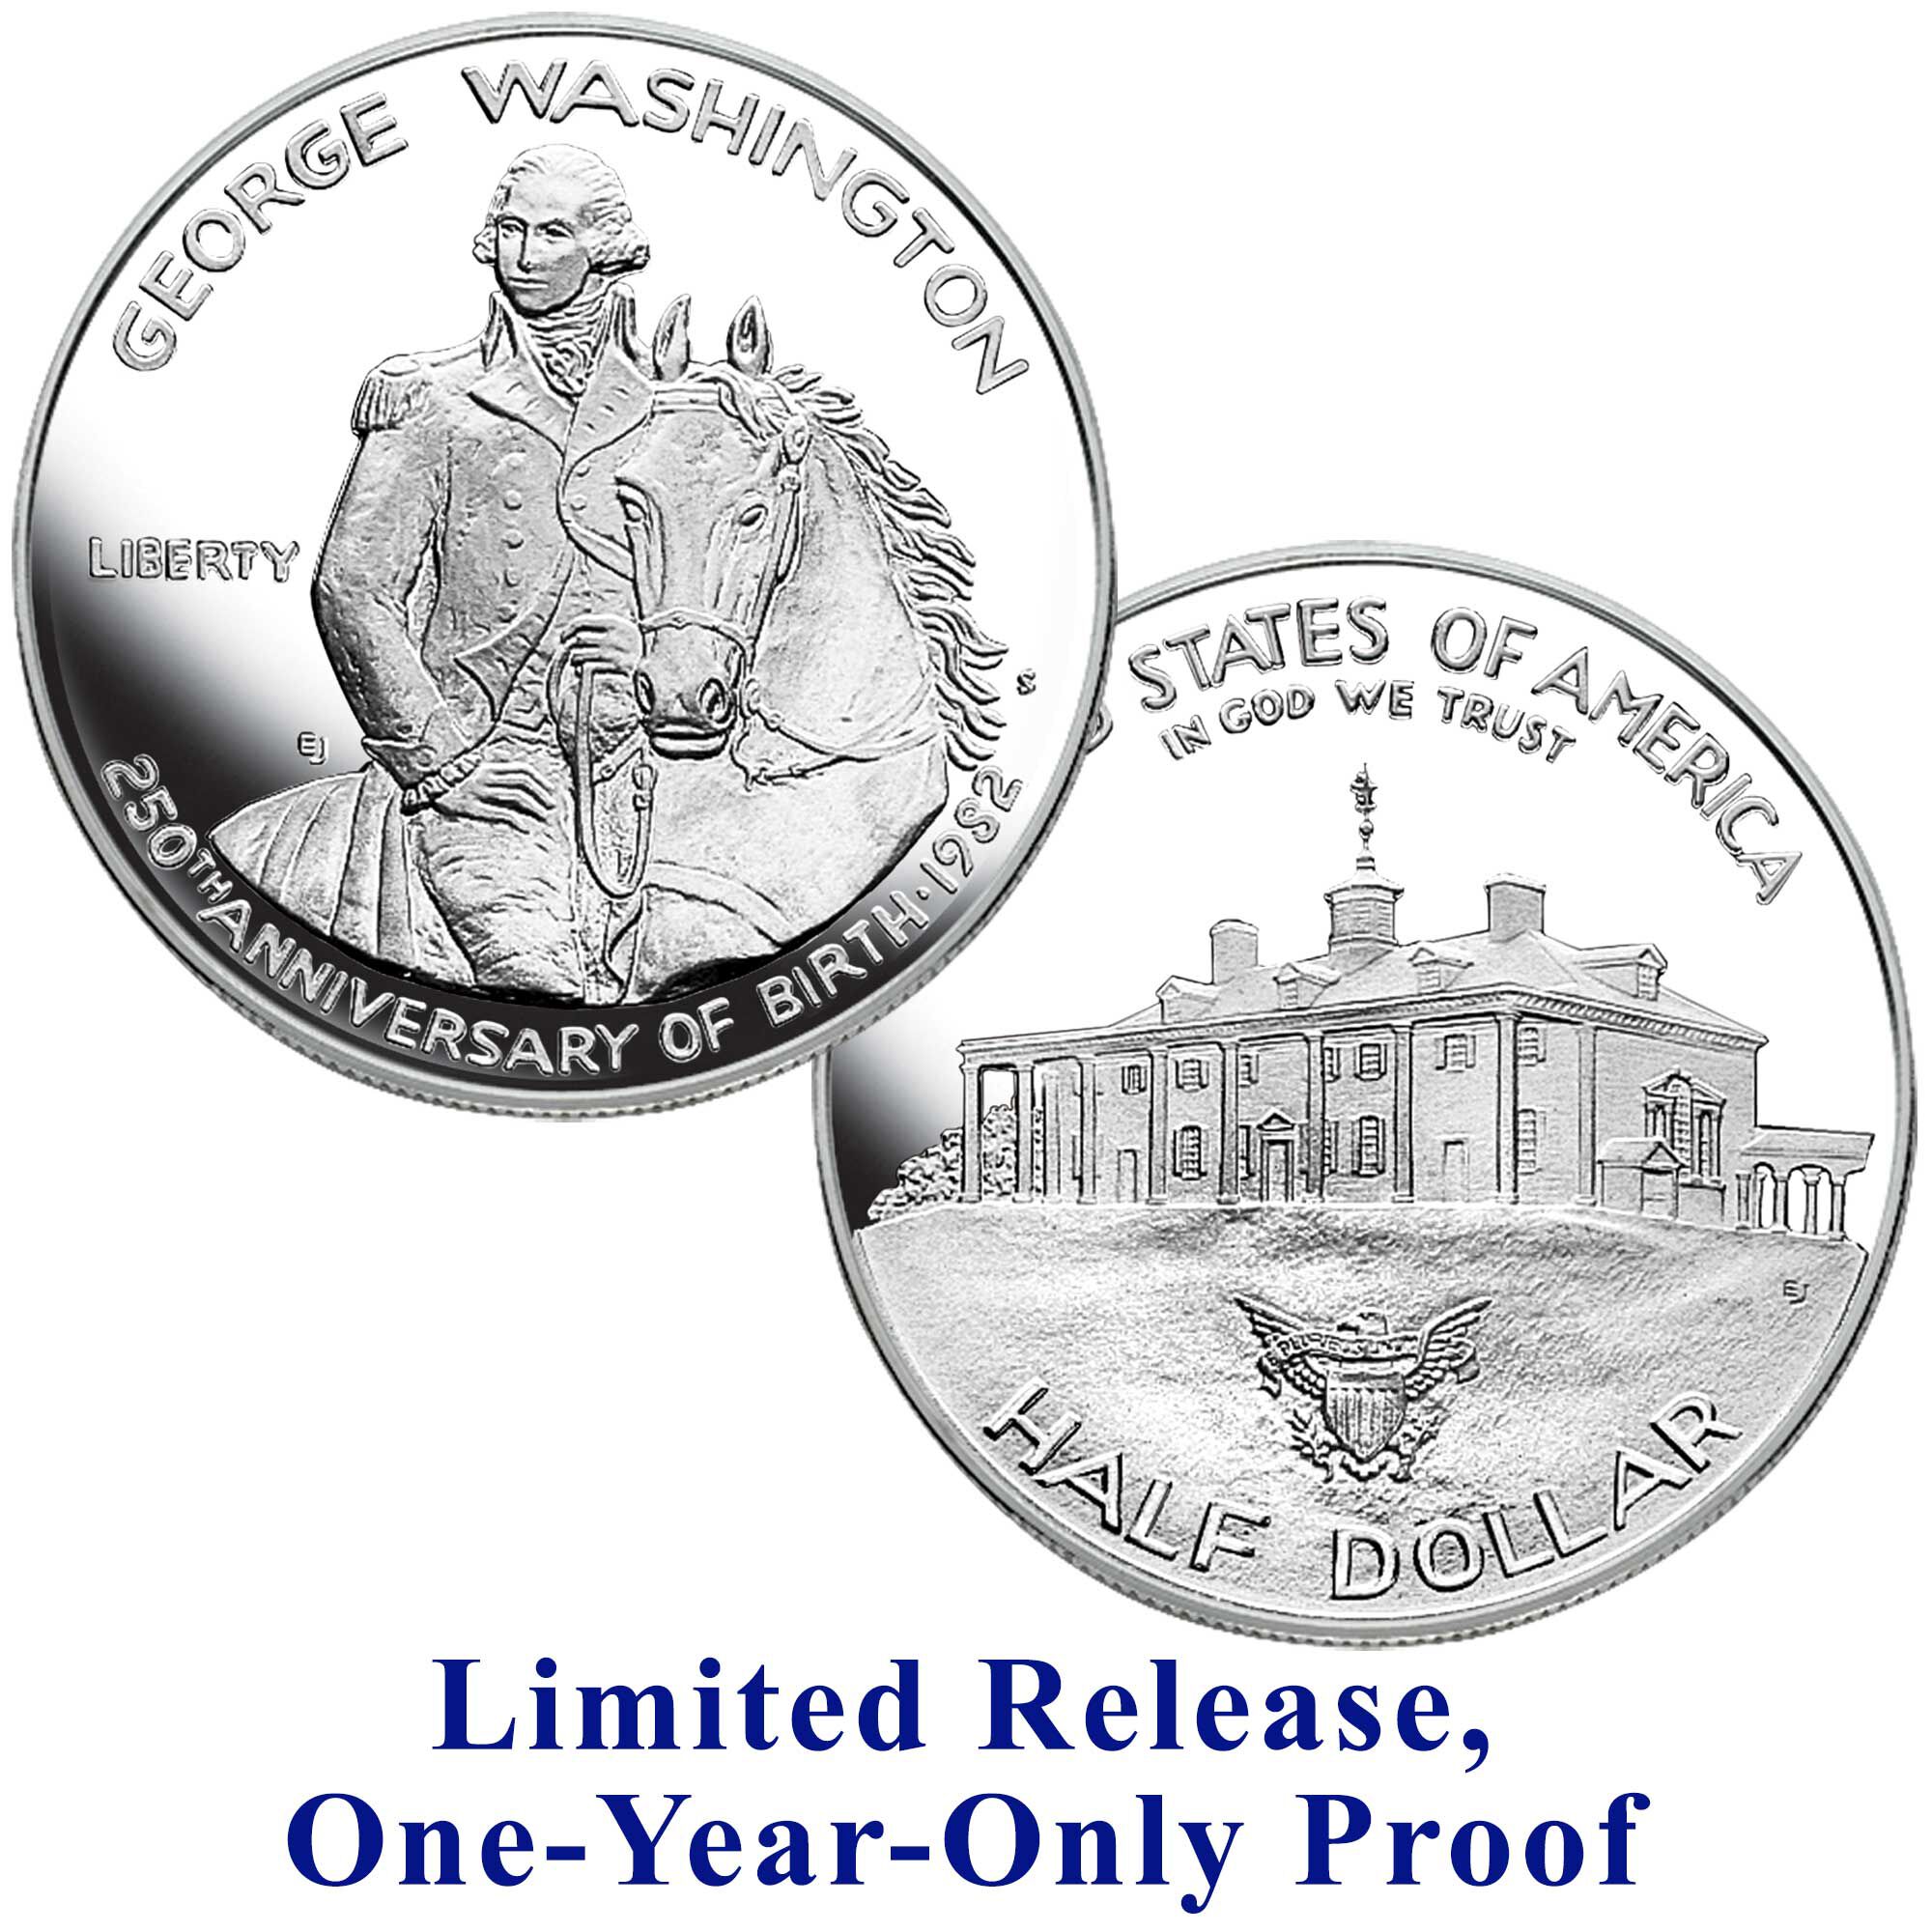 Limited-Release Washington Silver Half-Dollar – Introductory Discount